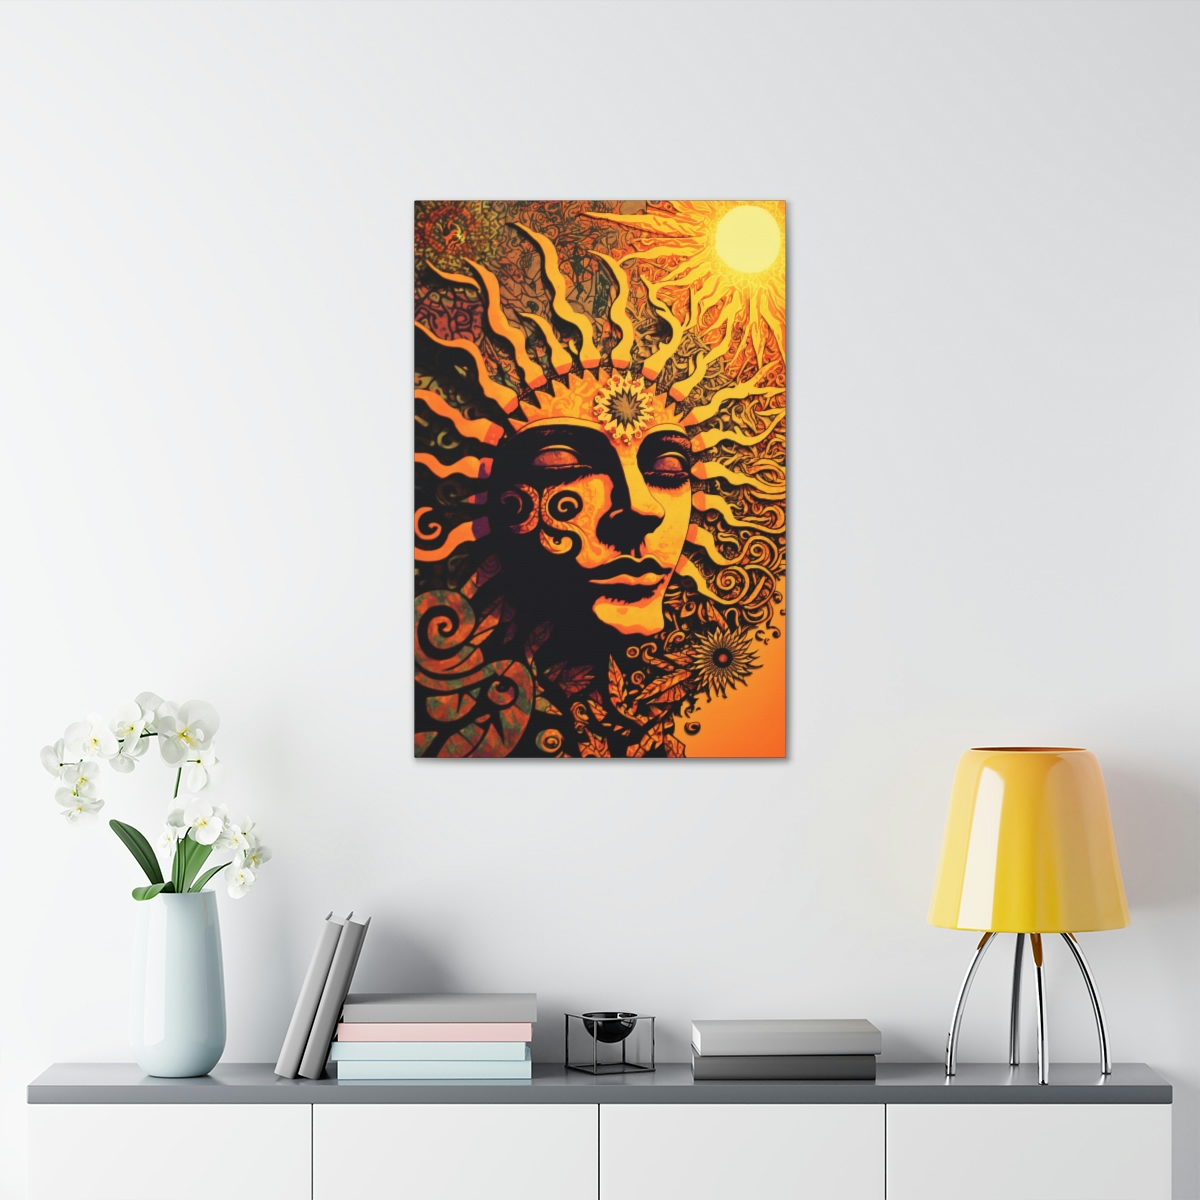 Trippy Art Canvas Print: Daughter Of The Sun